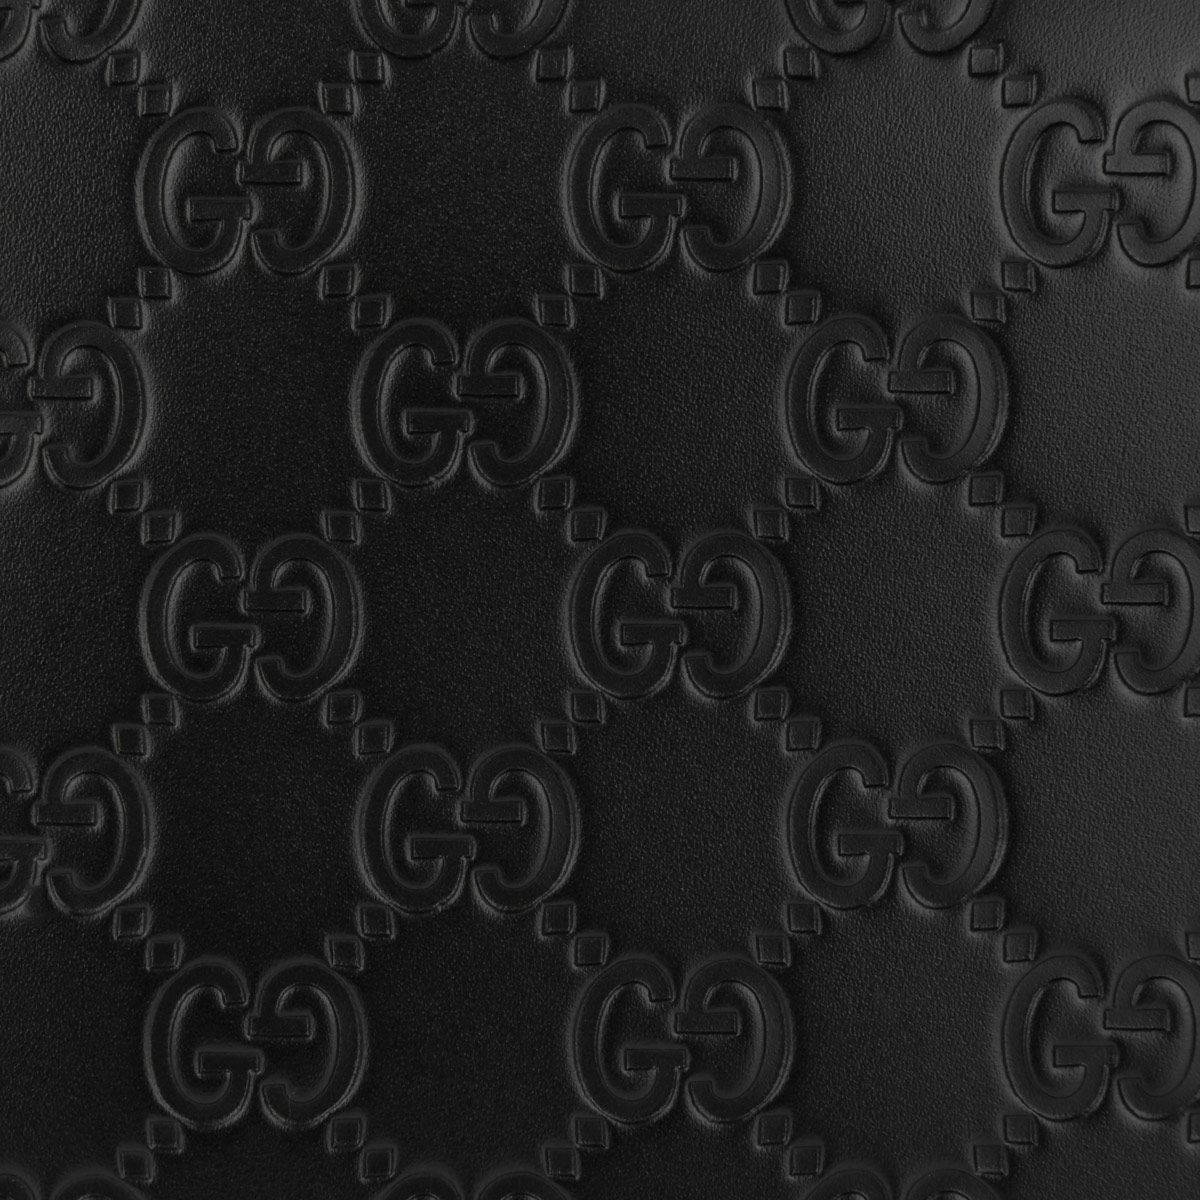 Black Leather Gucci Pattern Background